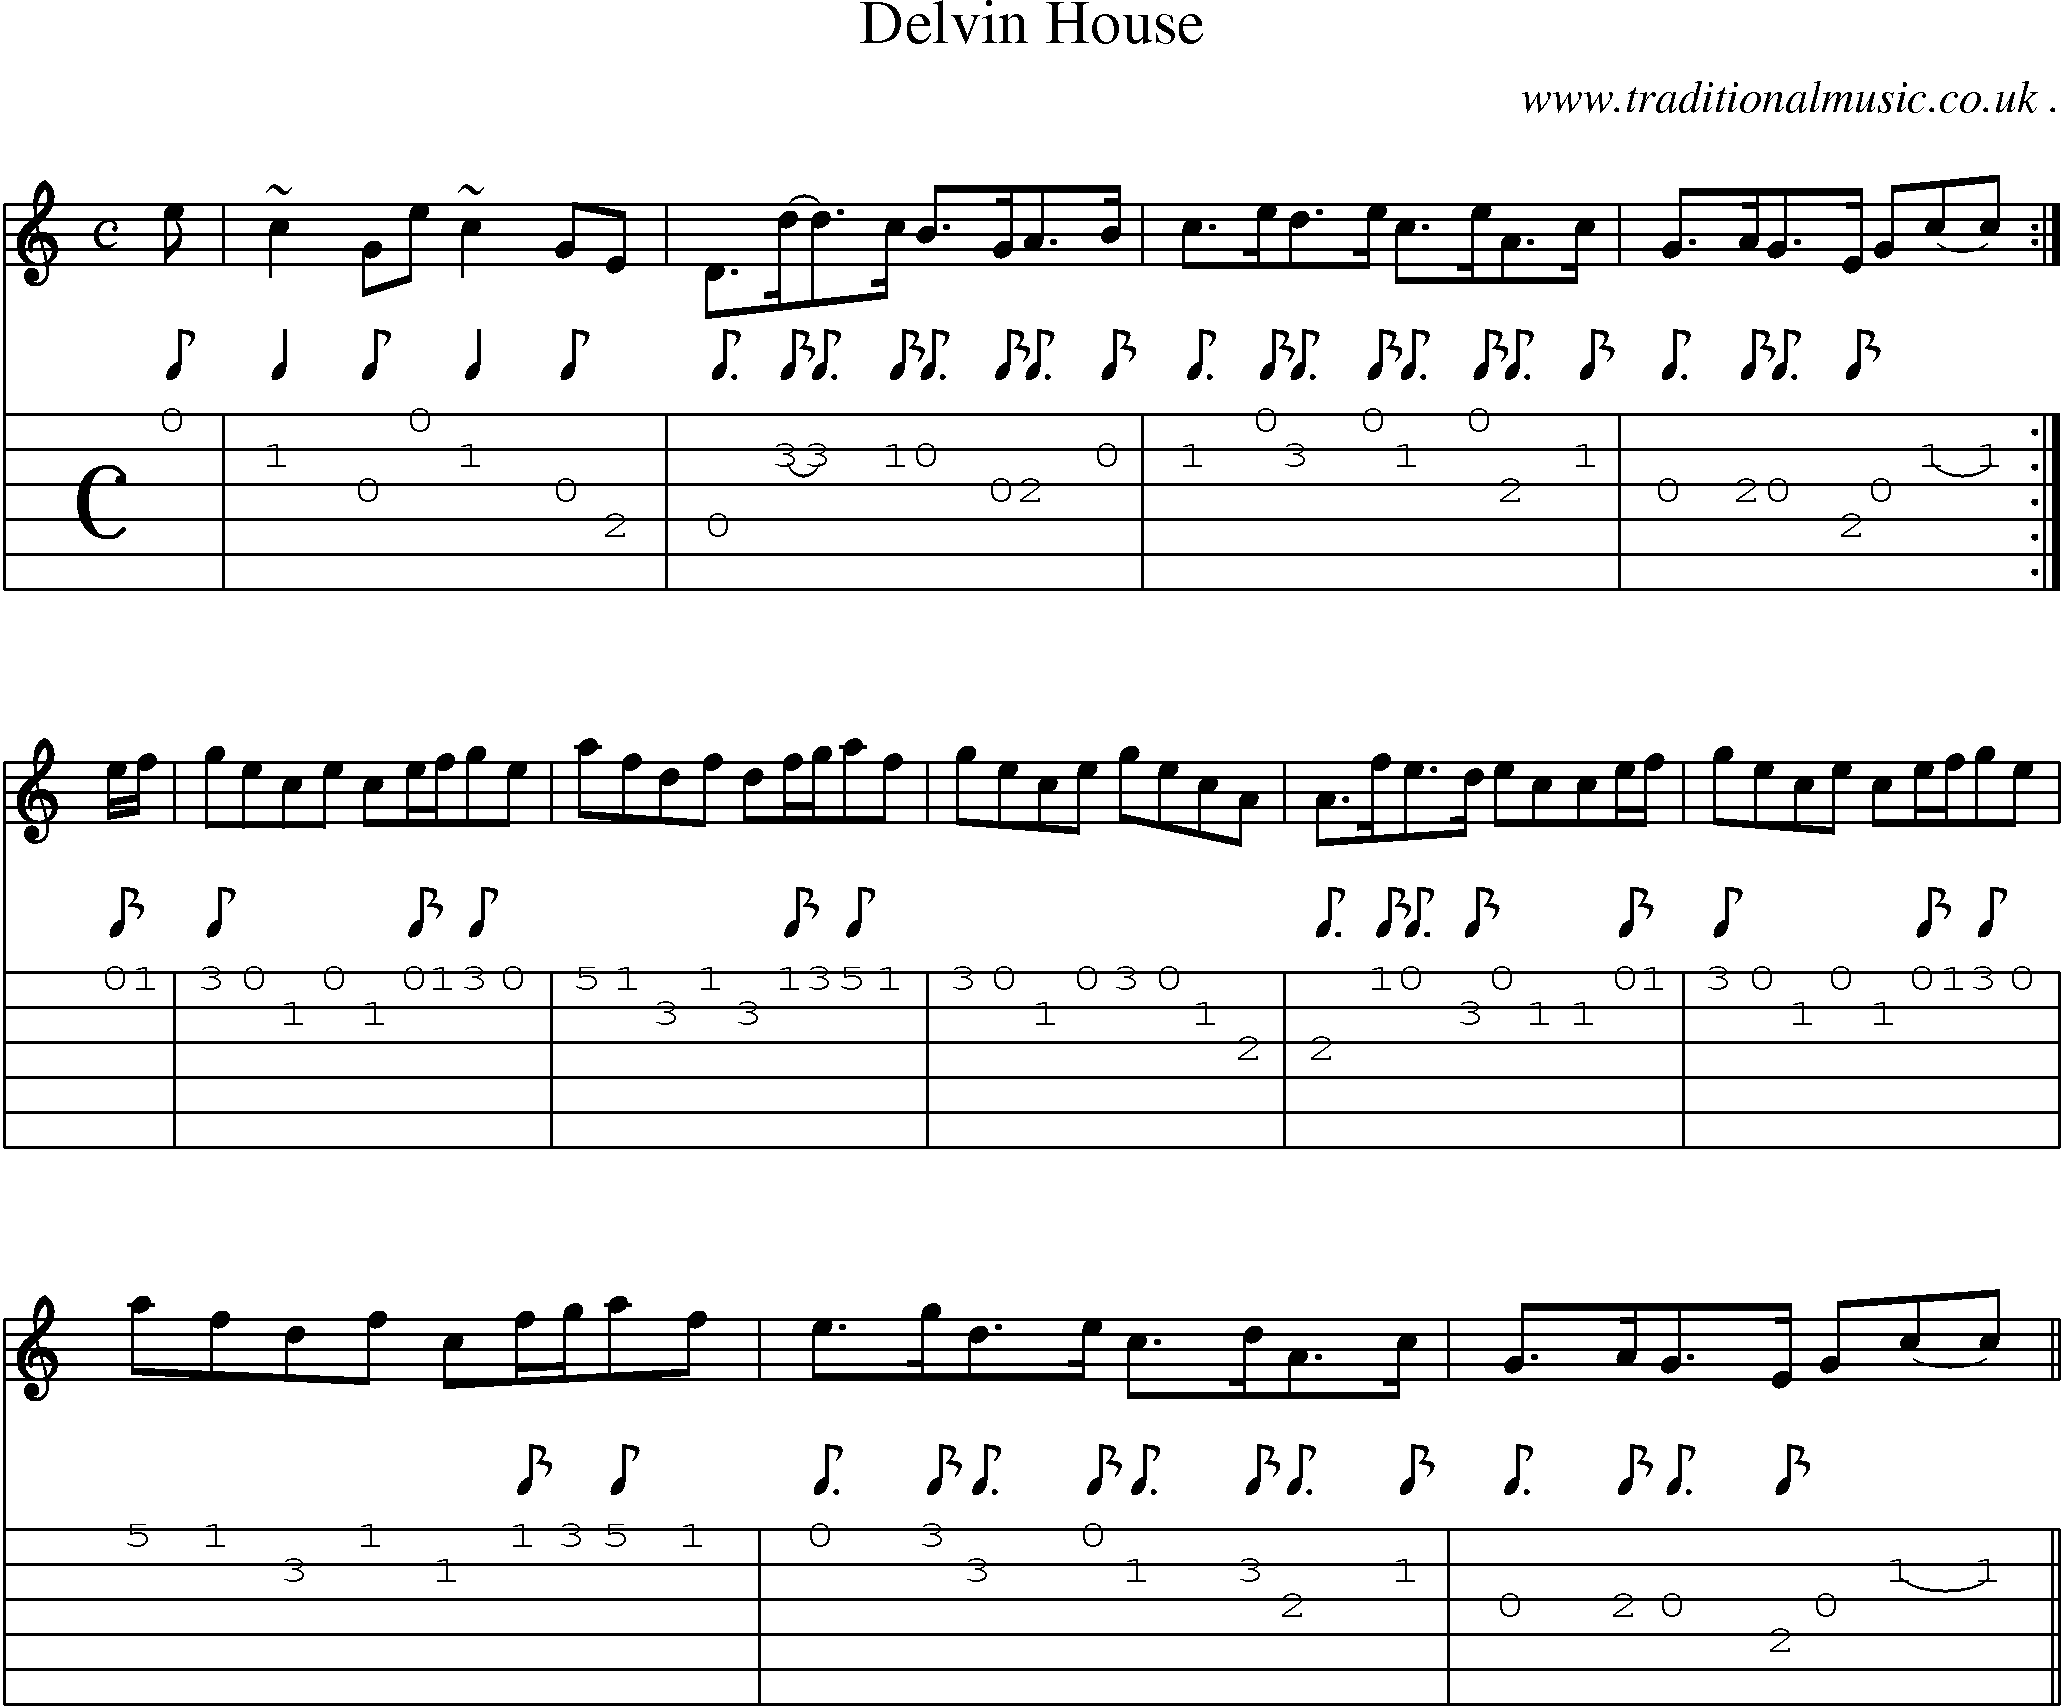 Sheet-music  score, Chords and Guitar Tabs for Delvin House